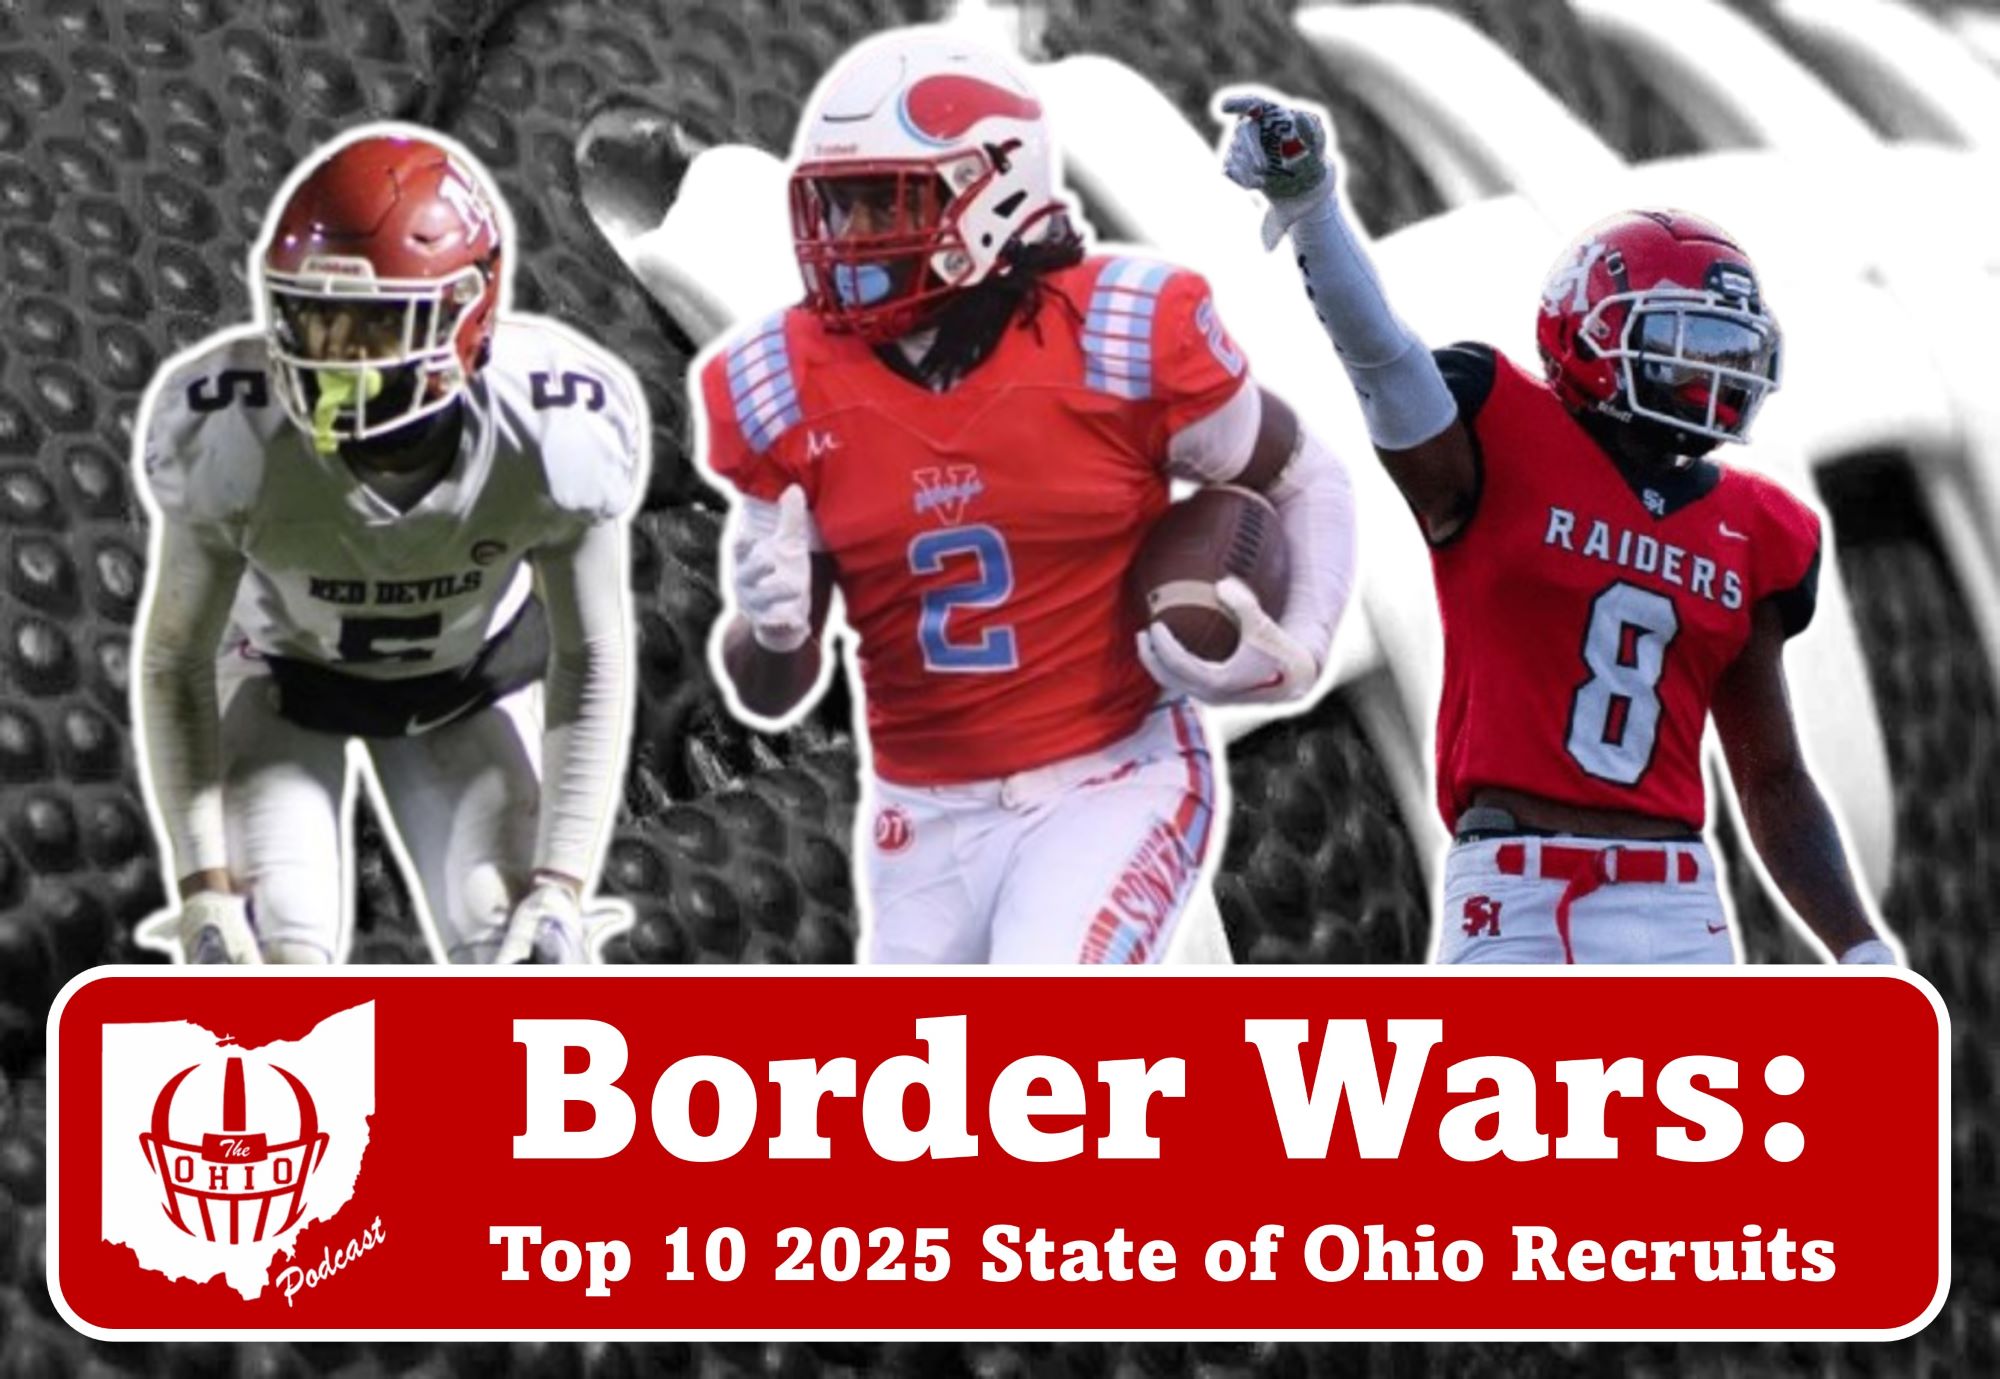 The top 10 2025 Recruits from the State of Ohio